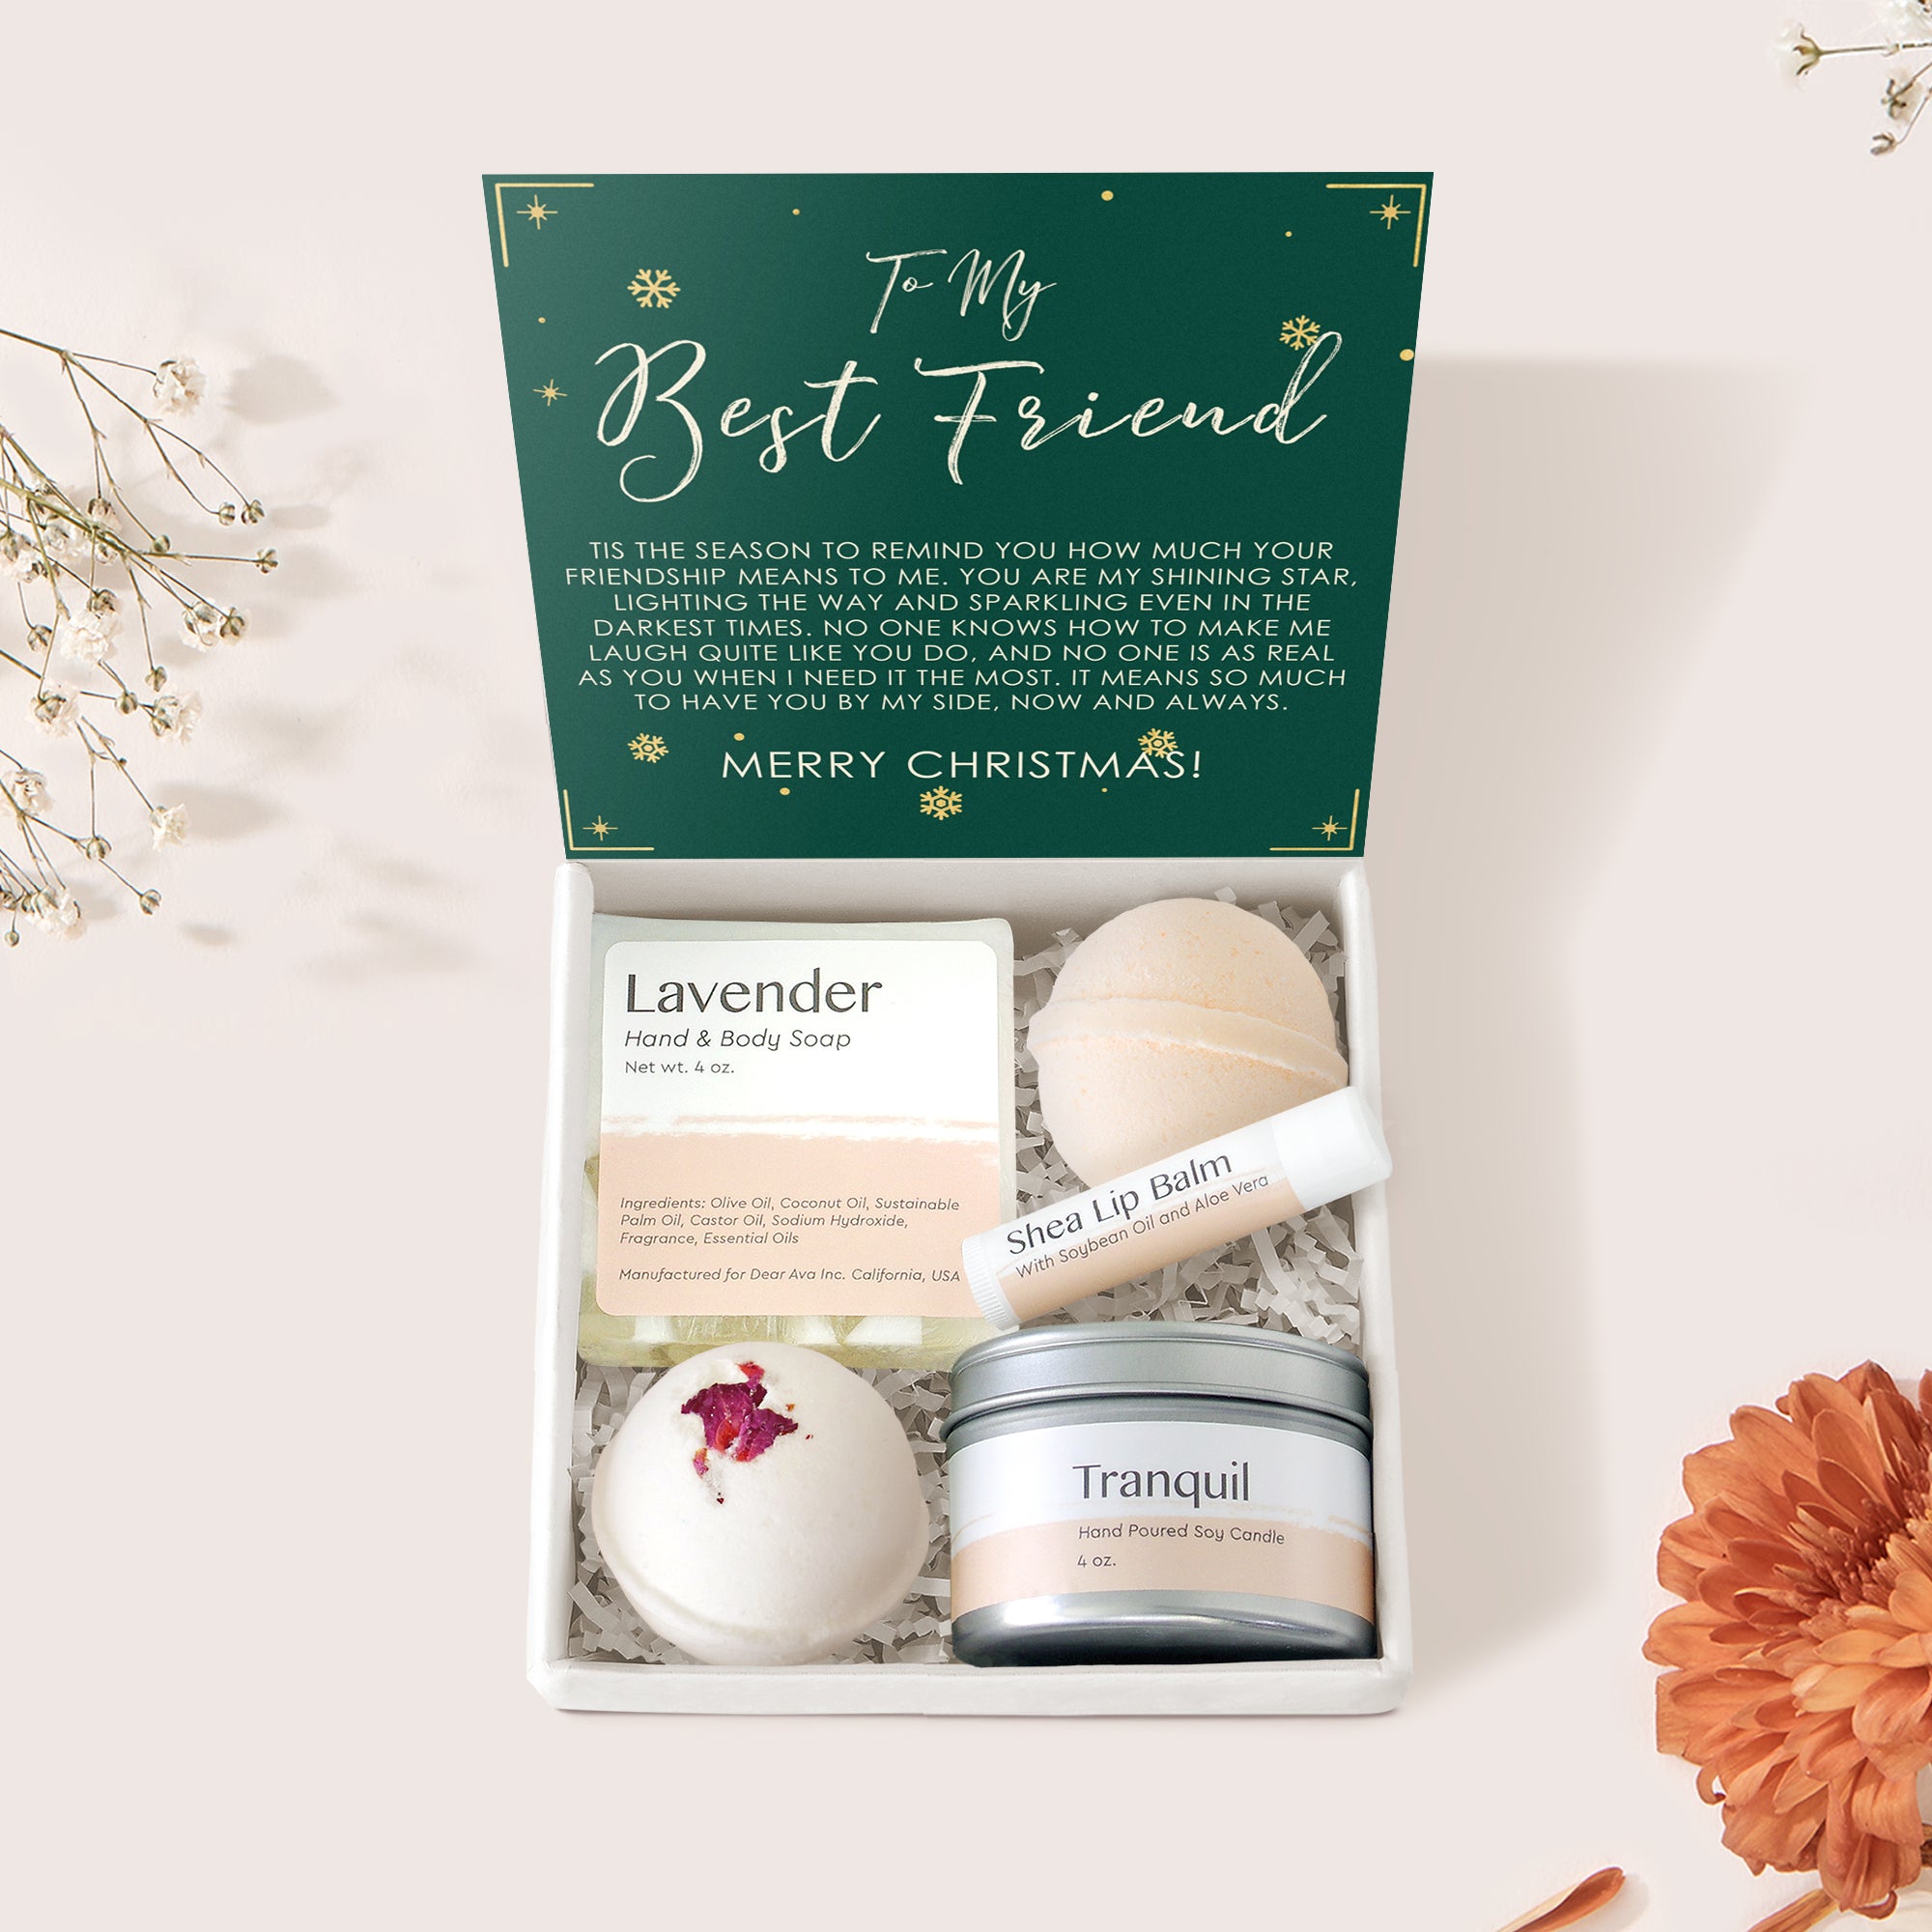 Gifts to celebrate your best friend this holiday season - Good